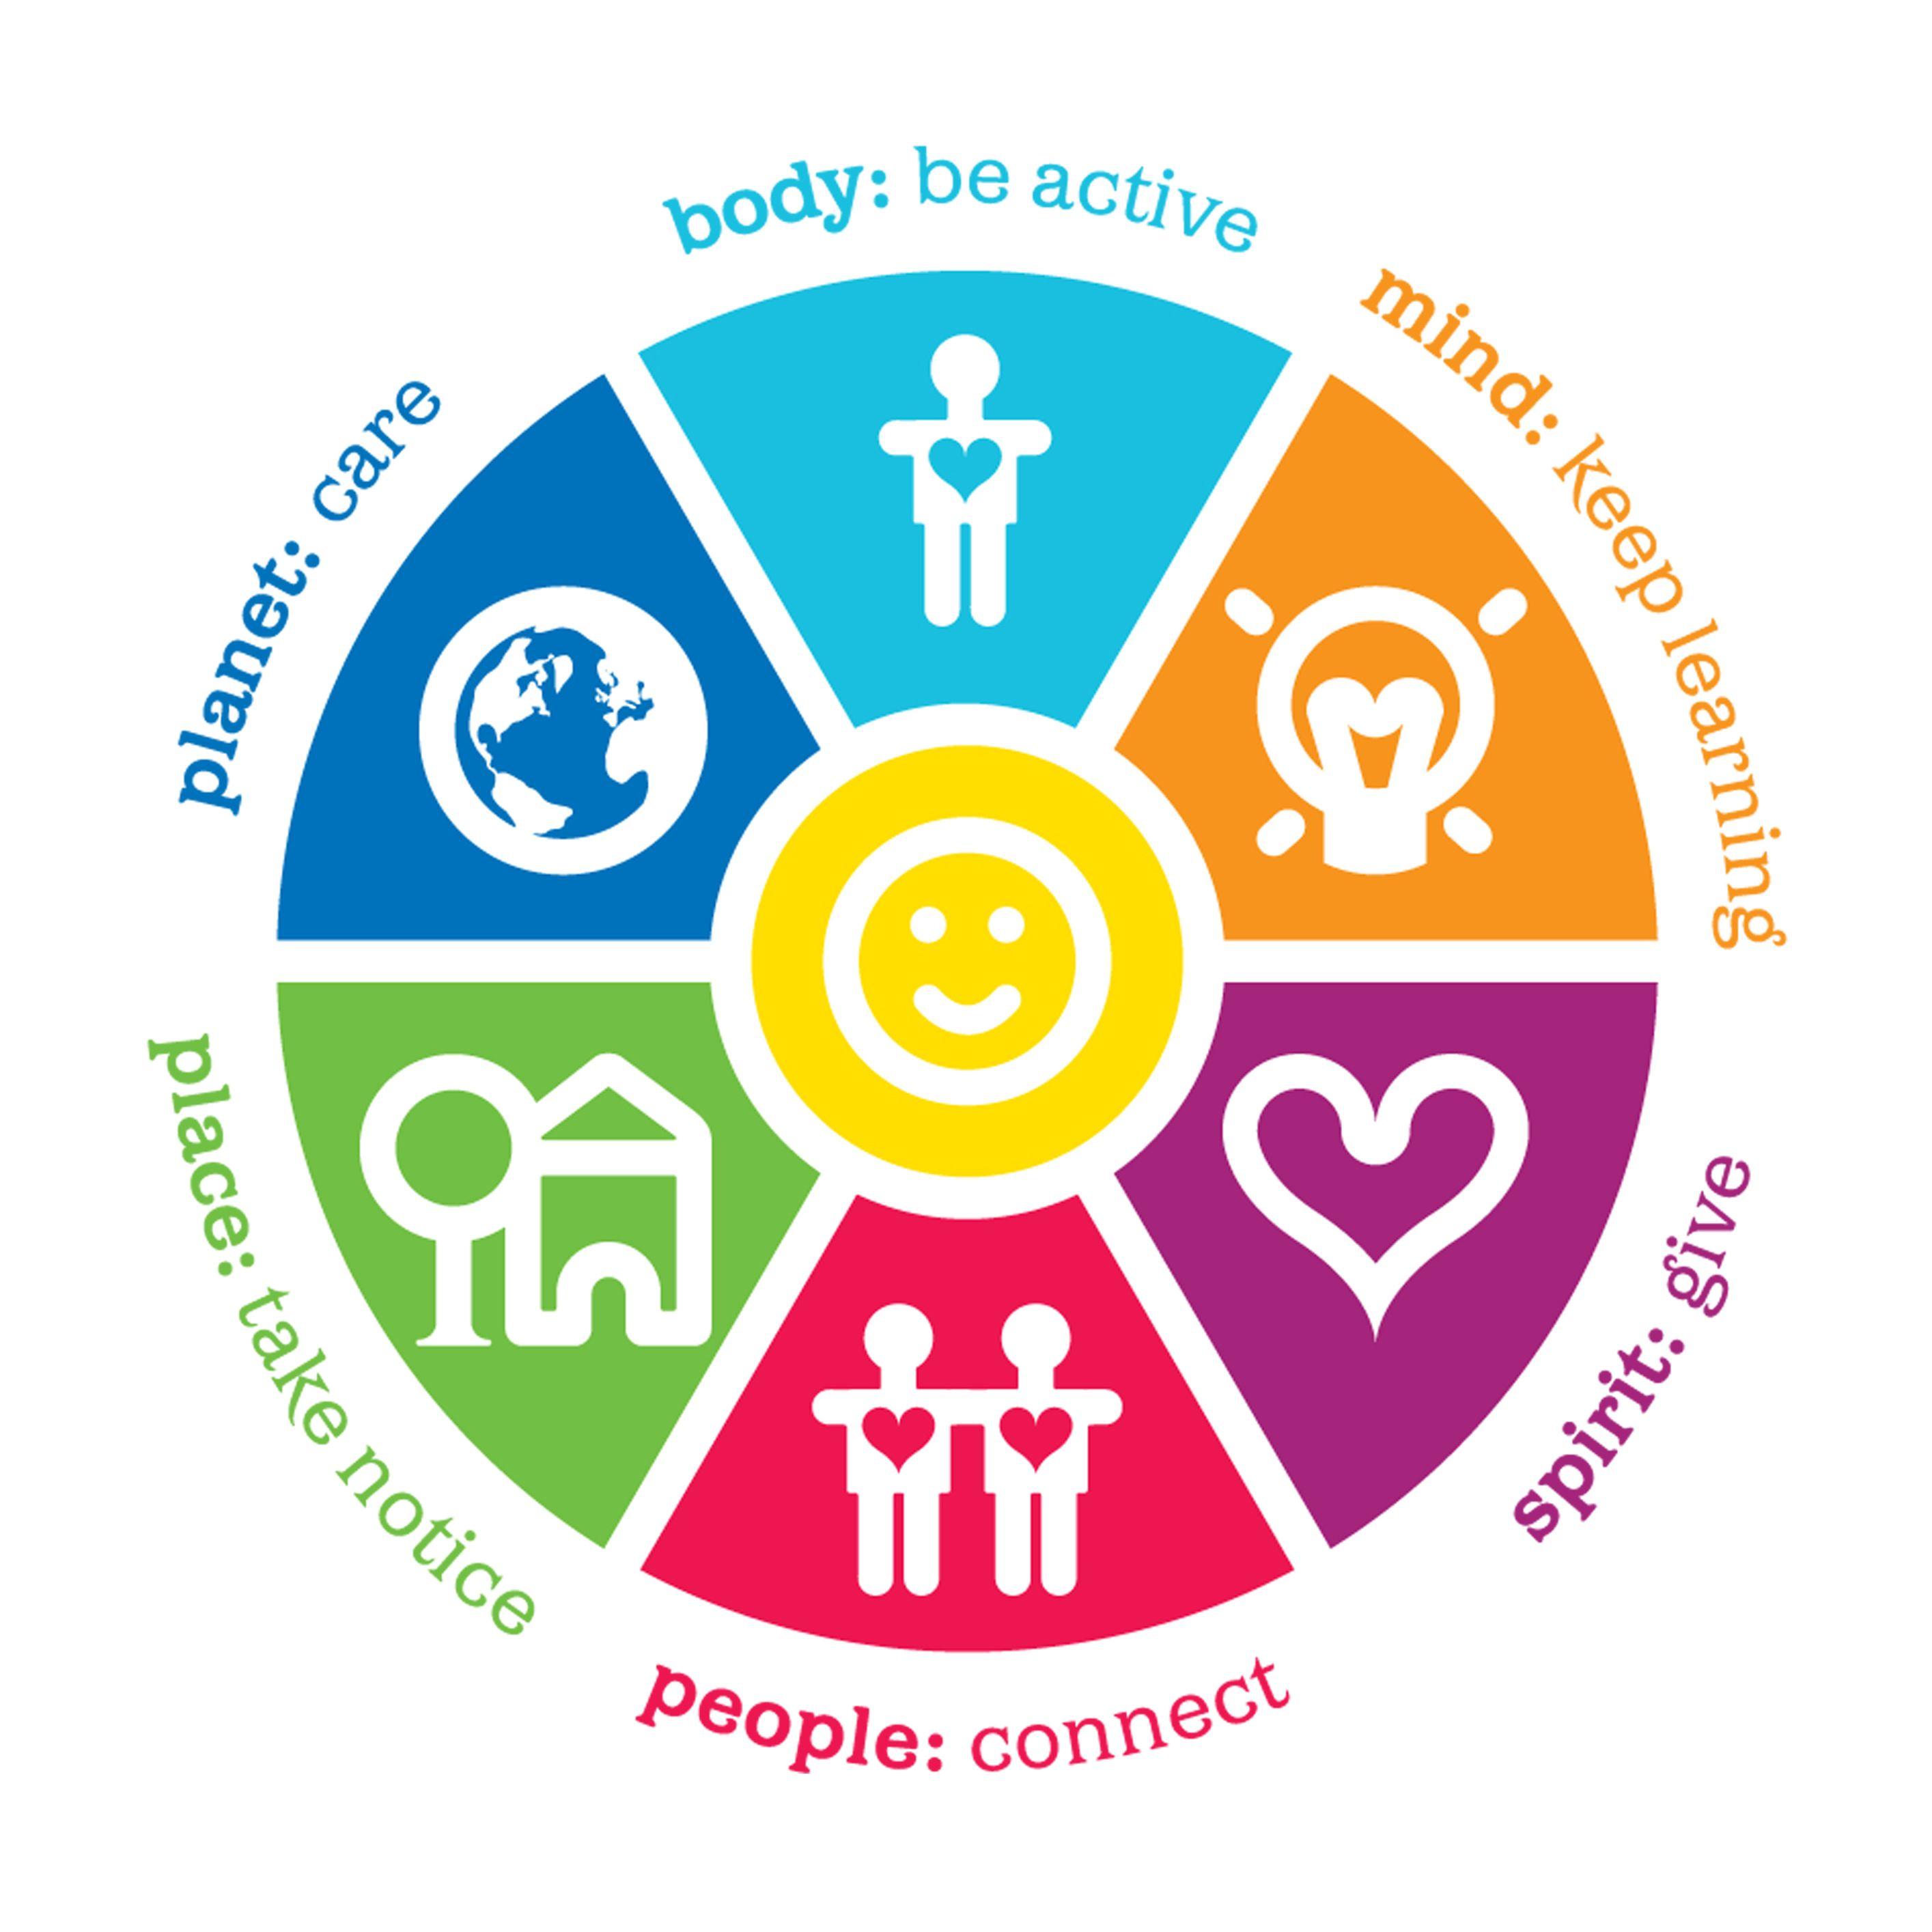 Well-Being Logo - Exploring The Wheel of Wellbeing - Network of Wellbeing